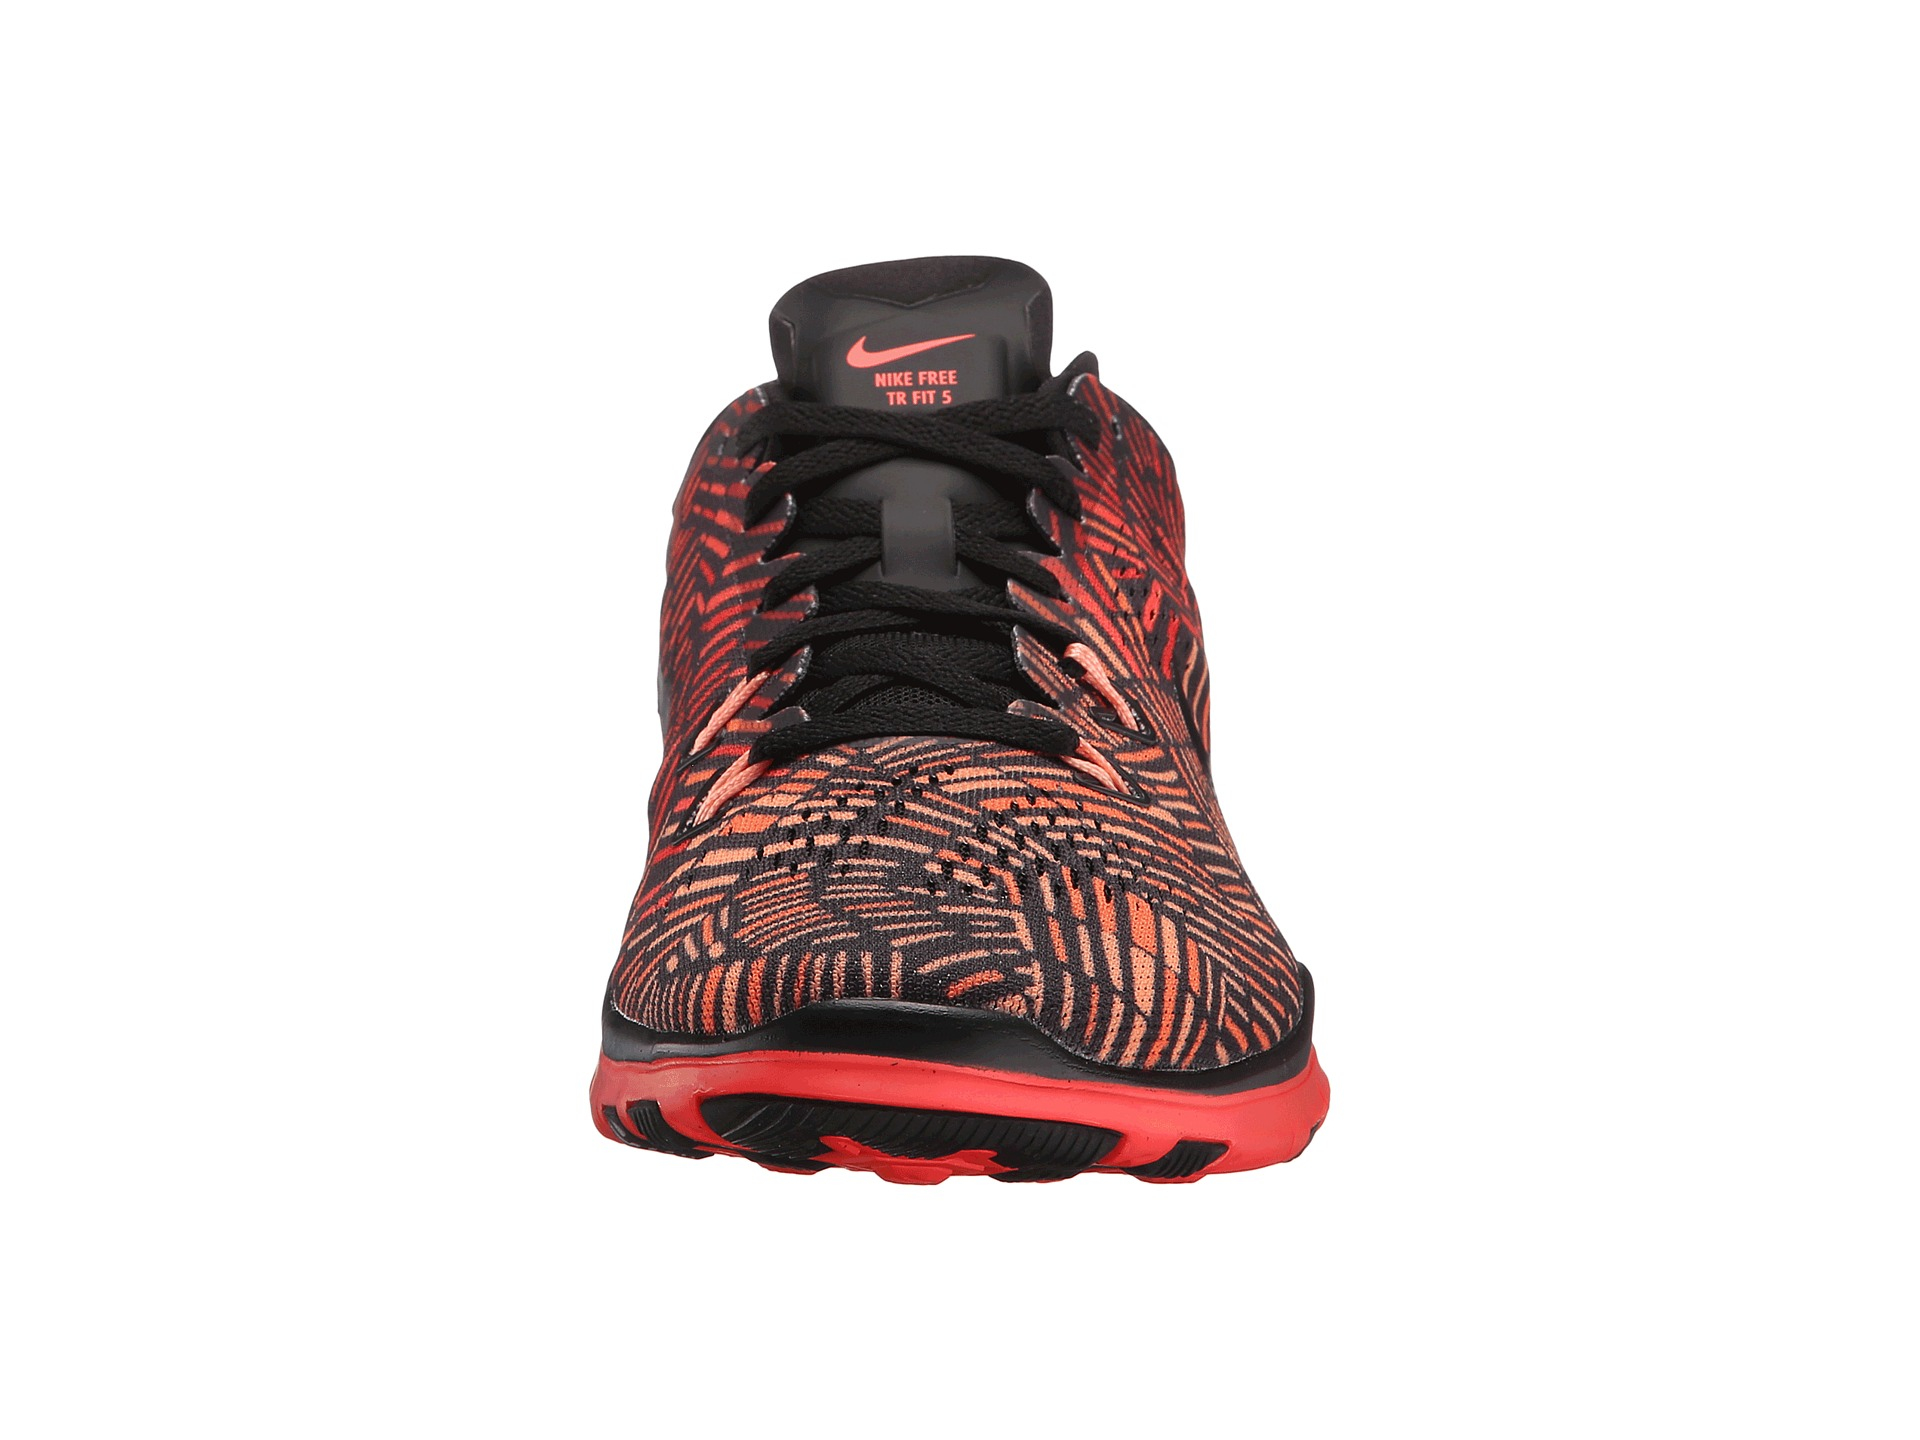 Nike Free 5.0 Tr Fit 5 Prt in Red - Lyst